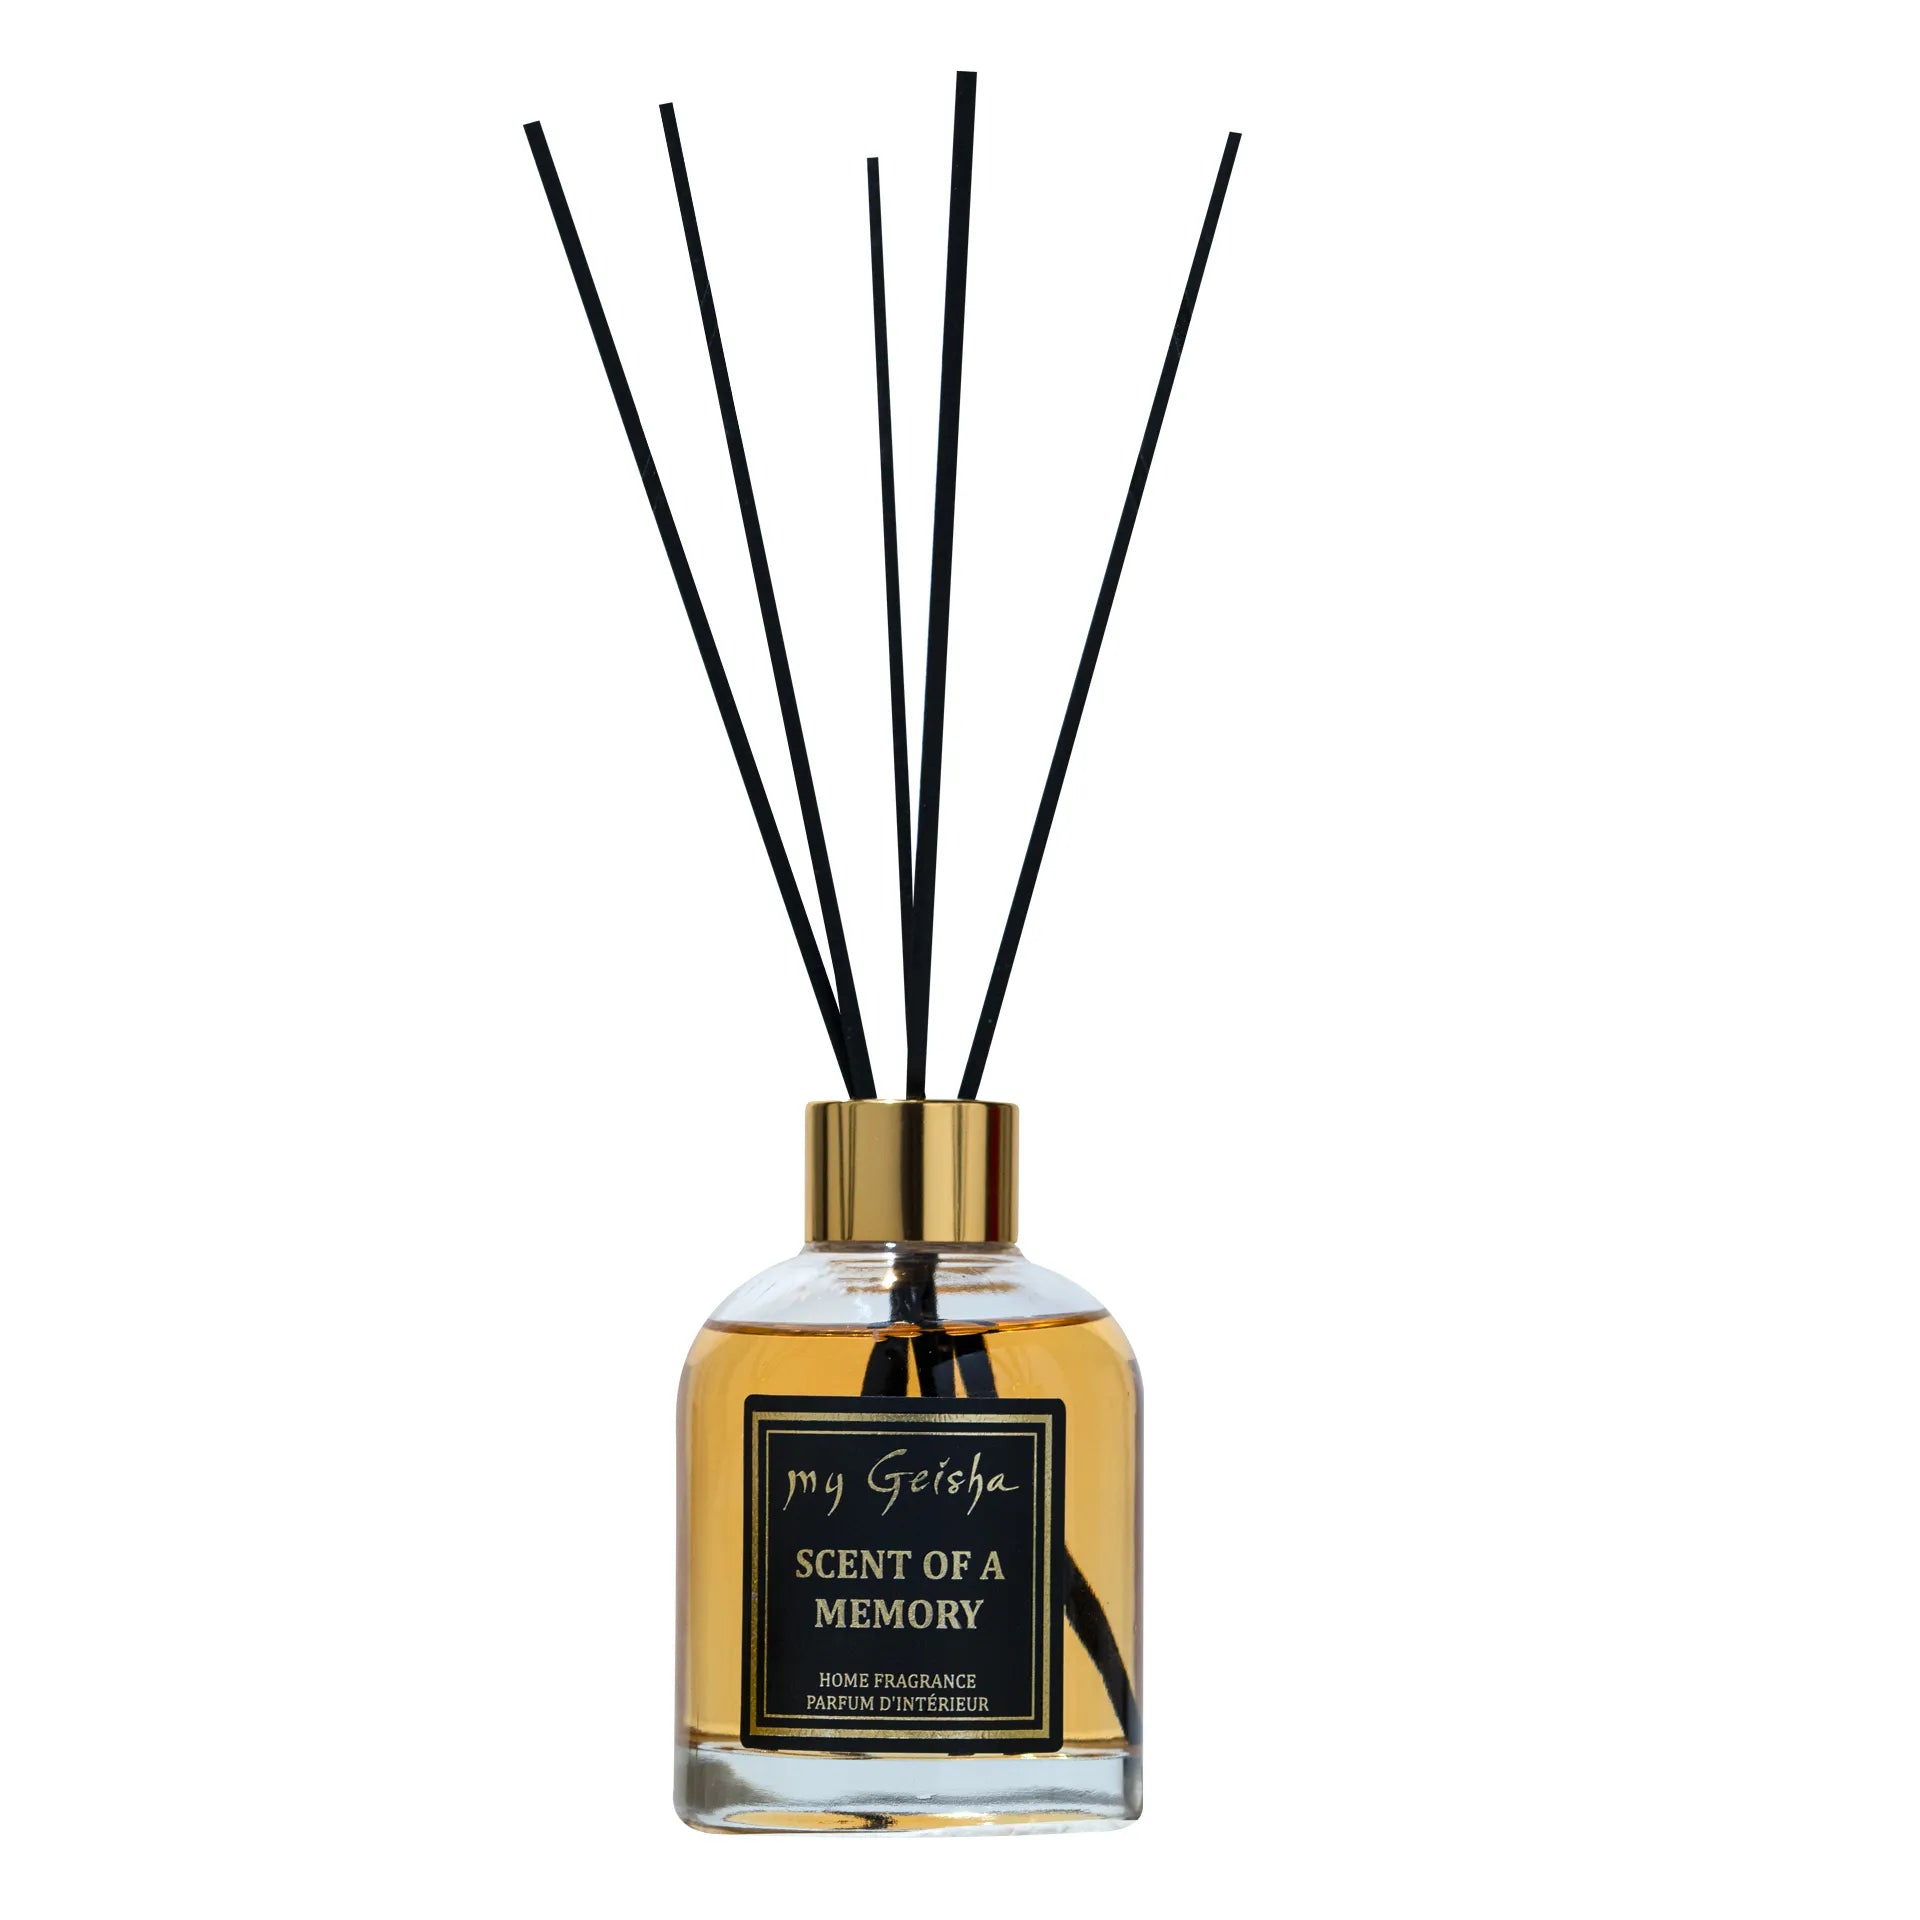 My Geisha Scent of a Memory Reed Diffuser